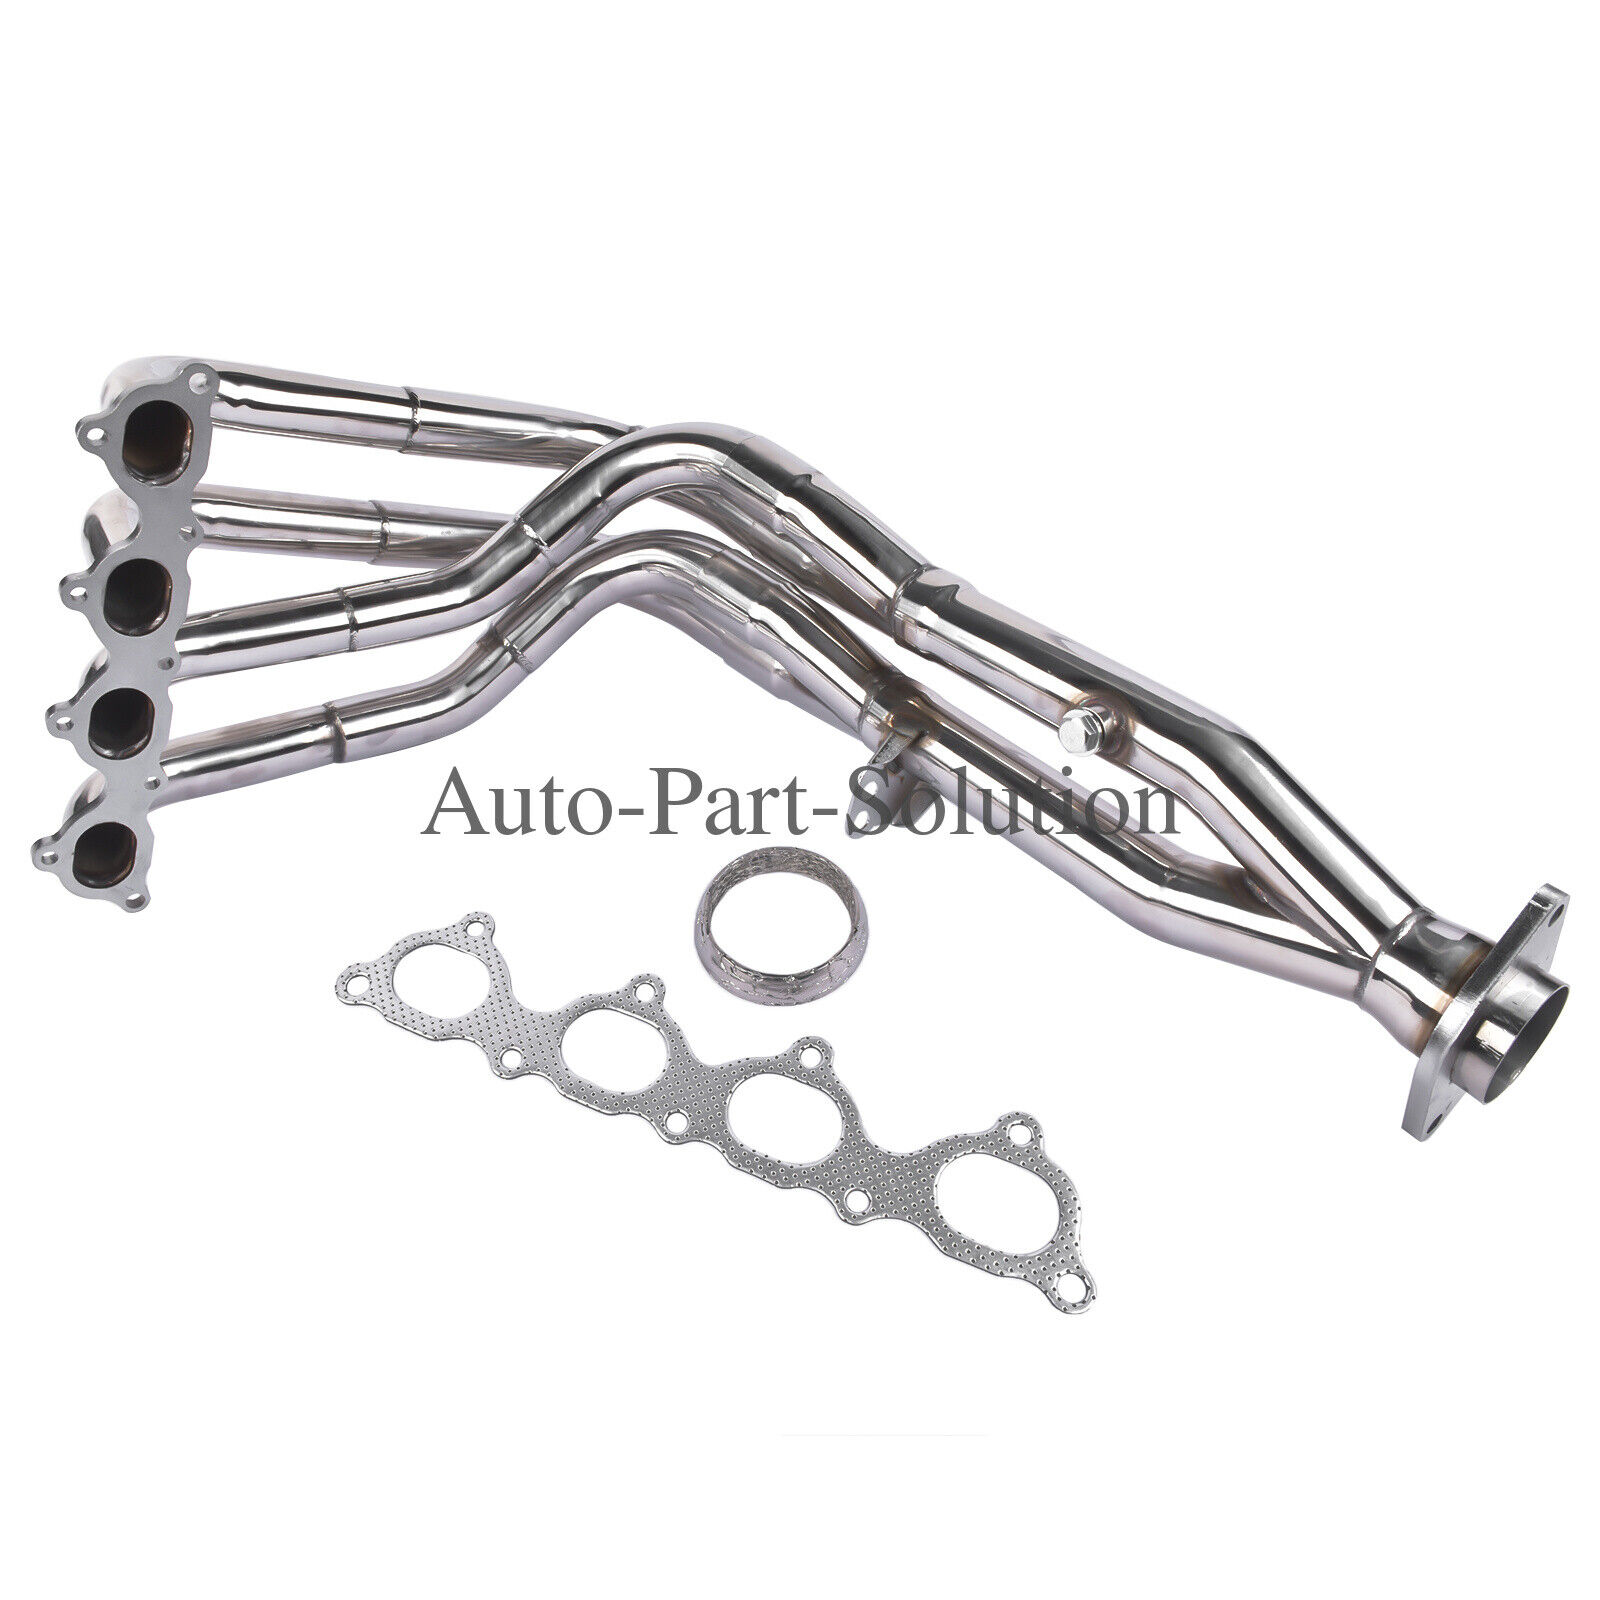 Stainless Steel Header Tri-Y for Integra GS/GSR/LS/B18 Civic Si 1994-2001